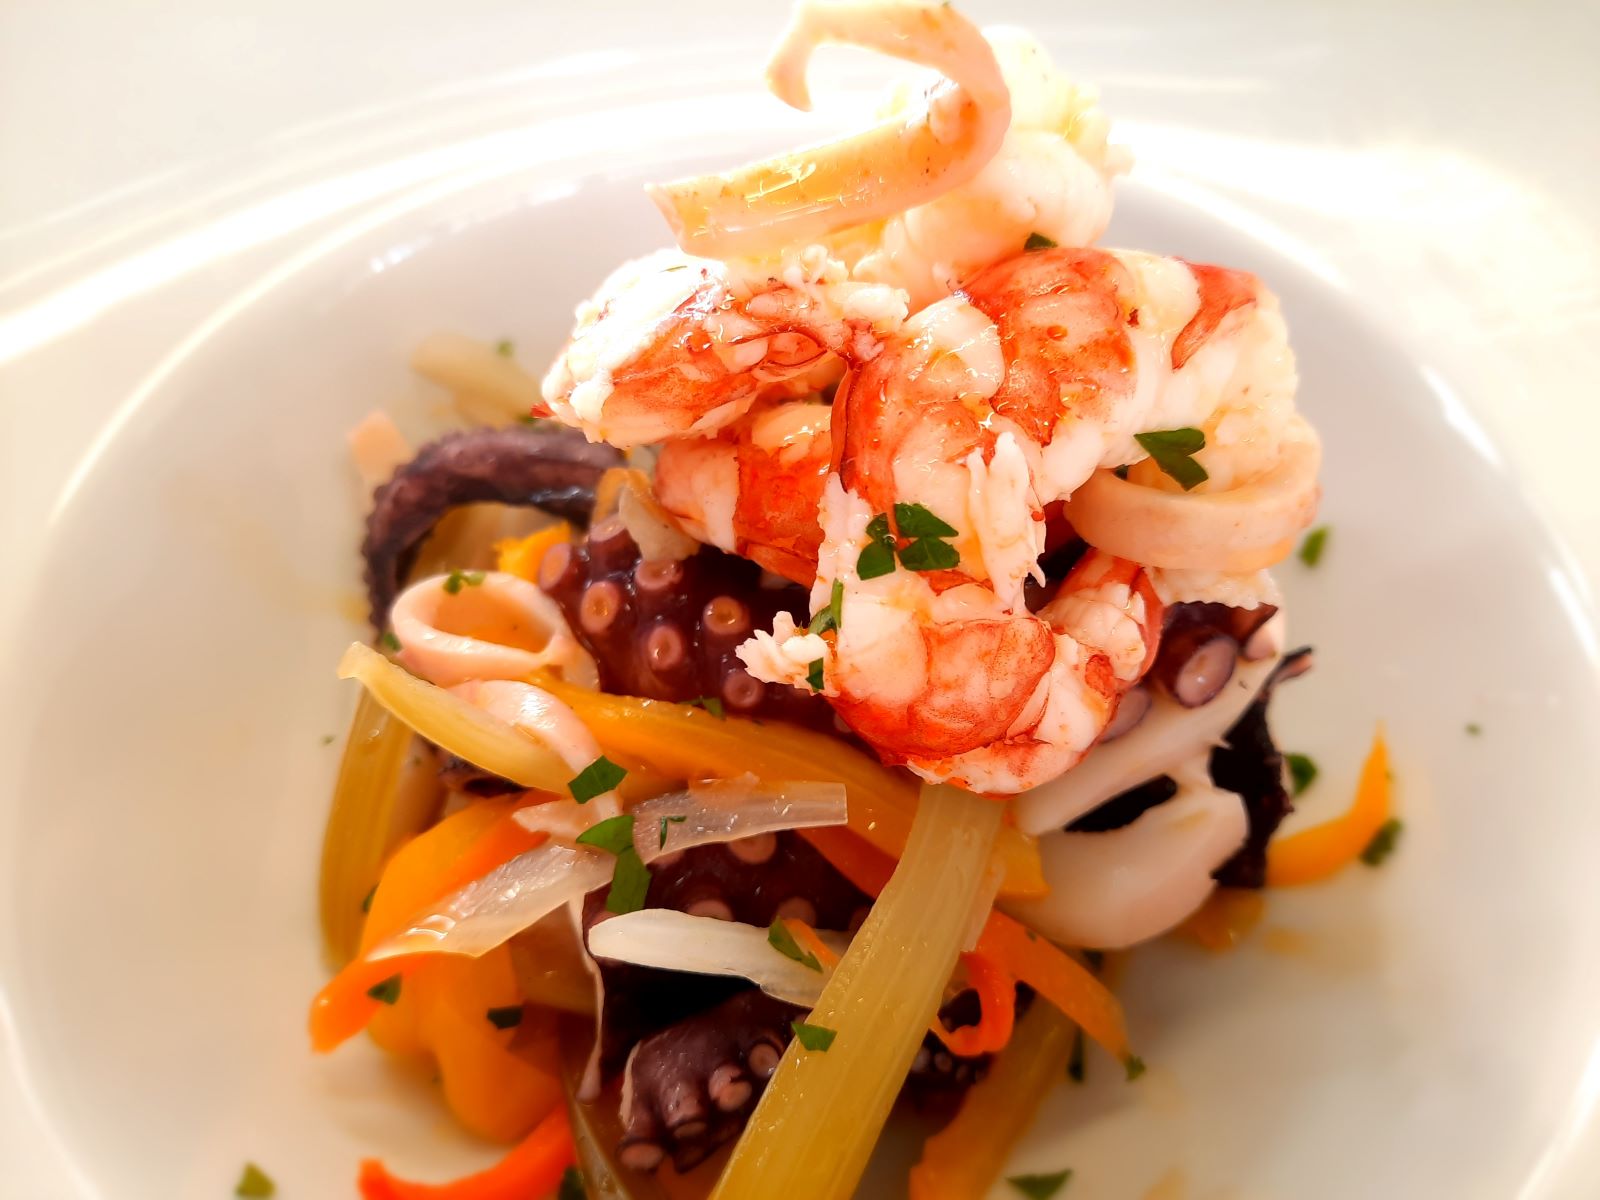 Seafood salad with octopus, cuttlefish and prawns